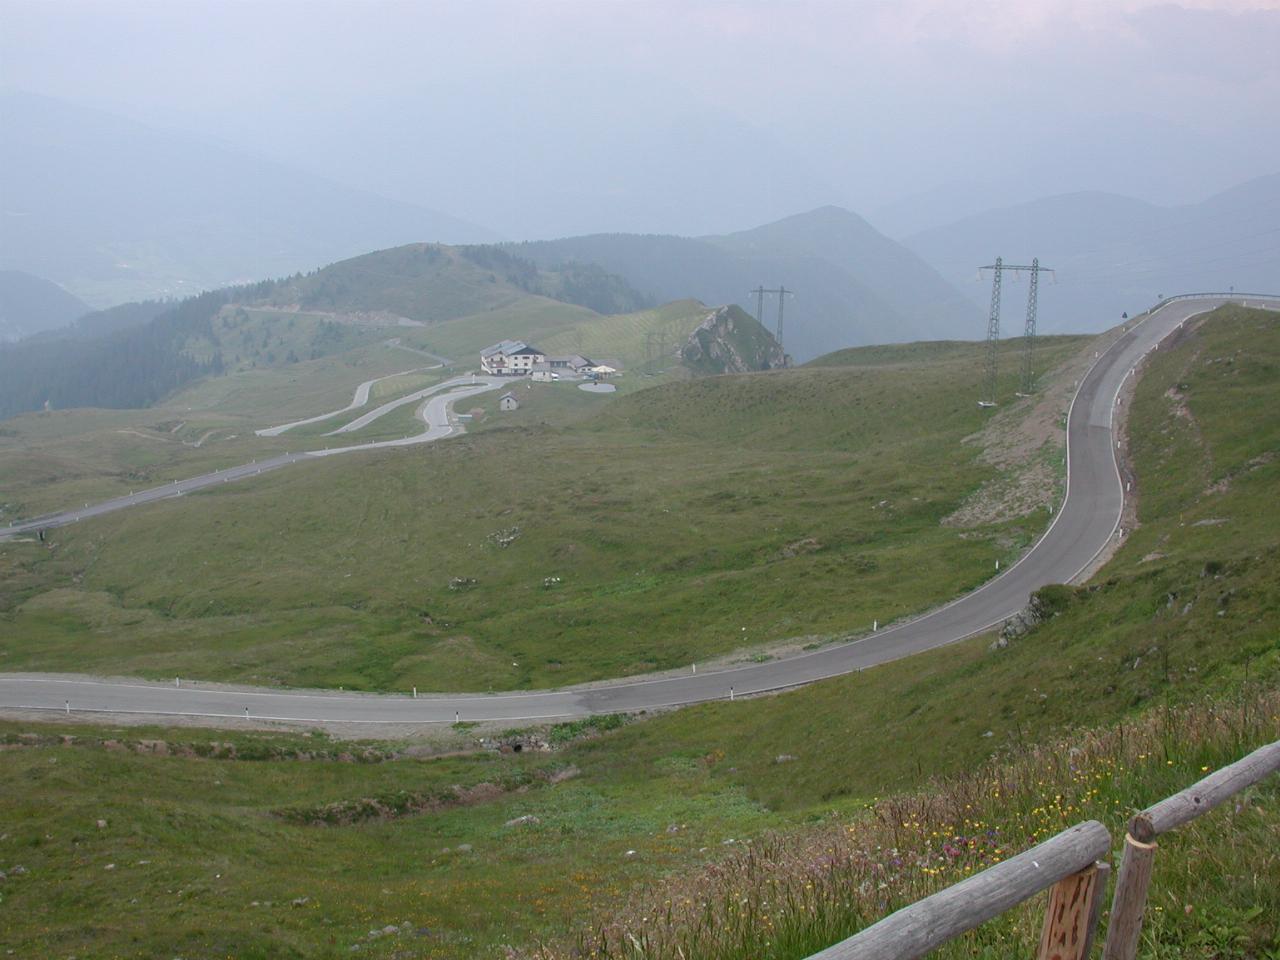 The road nearing the top of Jaufen Pass, approaching from the eastern side